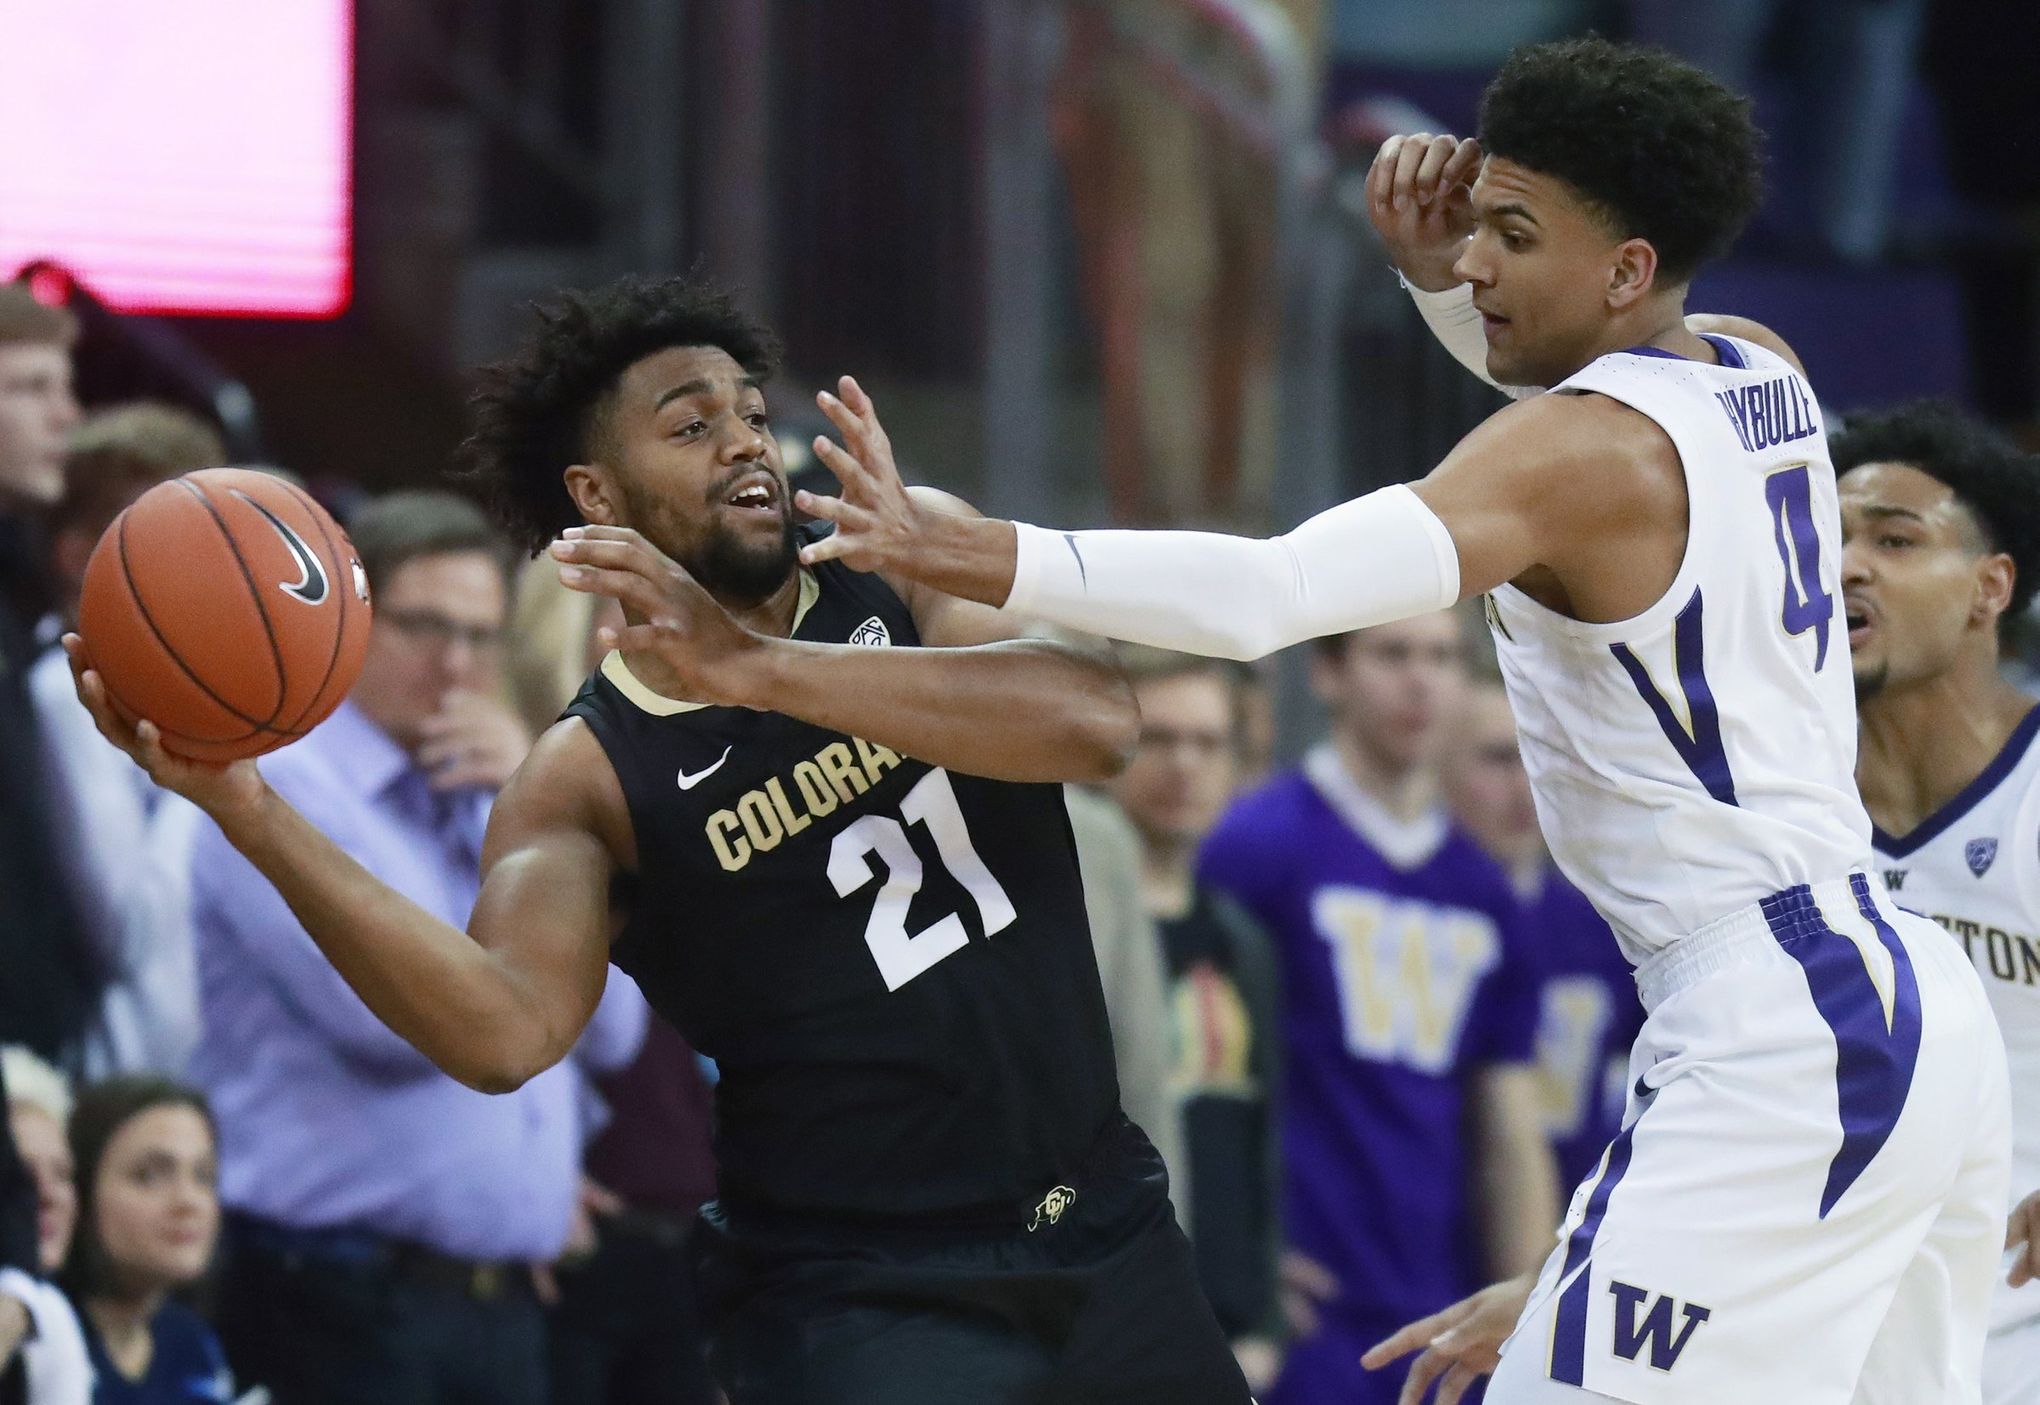 Matisse Thybulle, UW basketball star, has climbed into the national  conversation - Puget Sound Business Journal